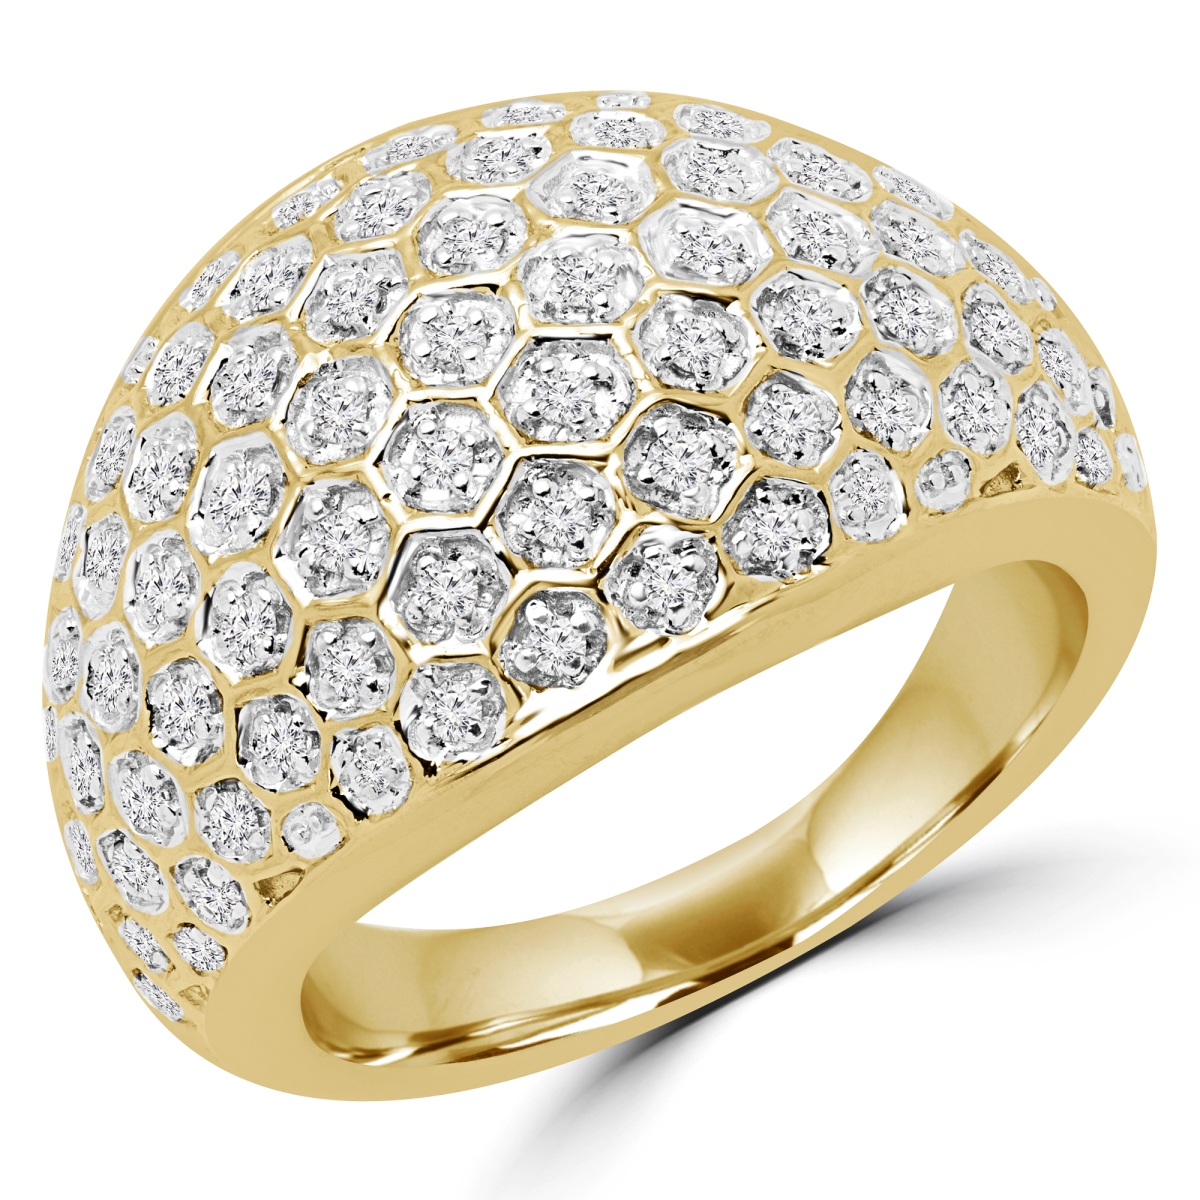 Picture of Majesty Diamonds MDR170046-3.5 0.5 CTW Round Diamond Pave Cocktail Ring in 14K Yellow Gold - 3.5